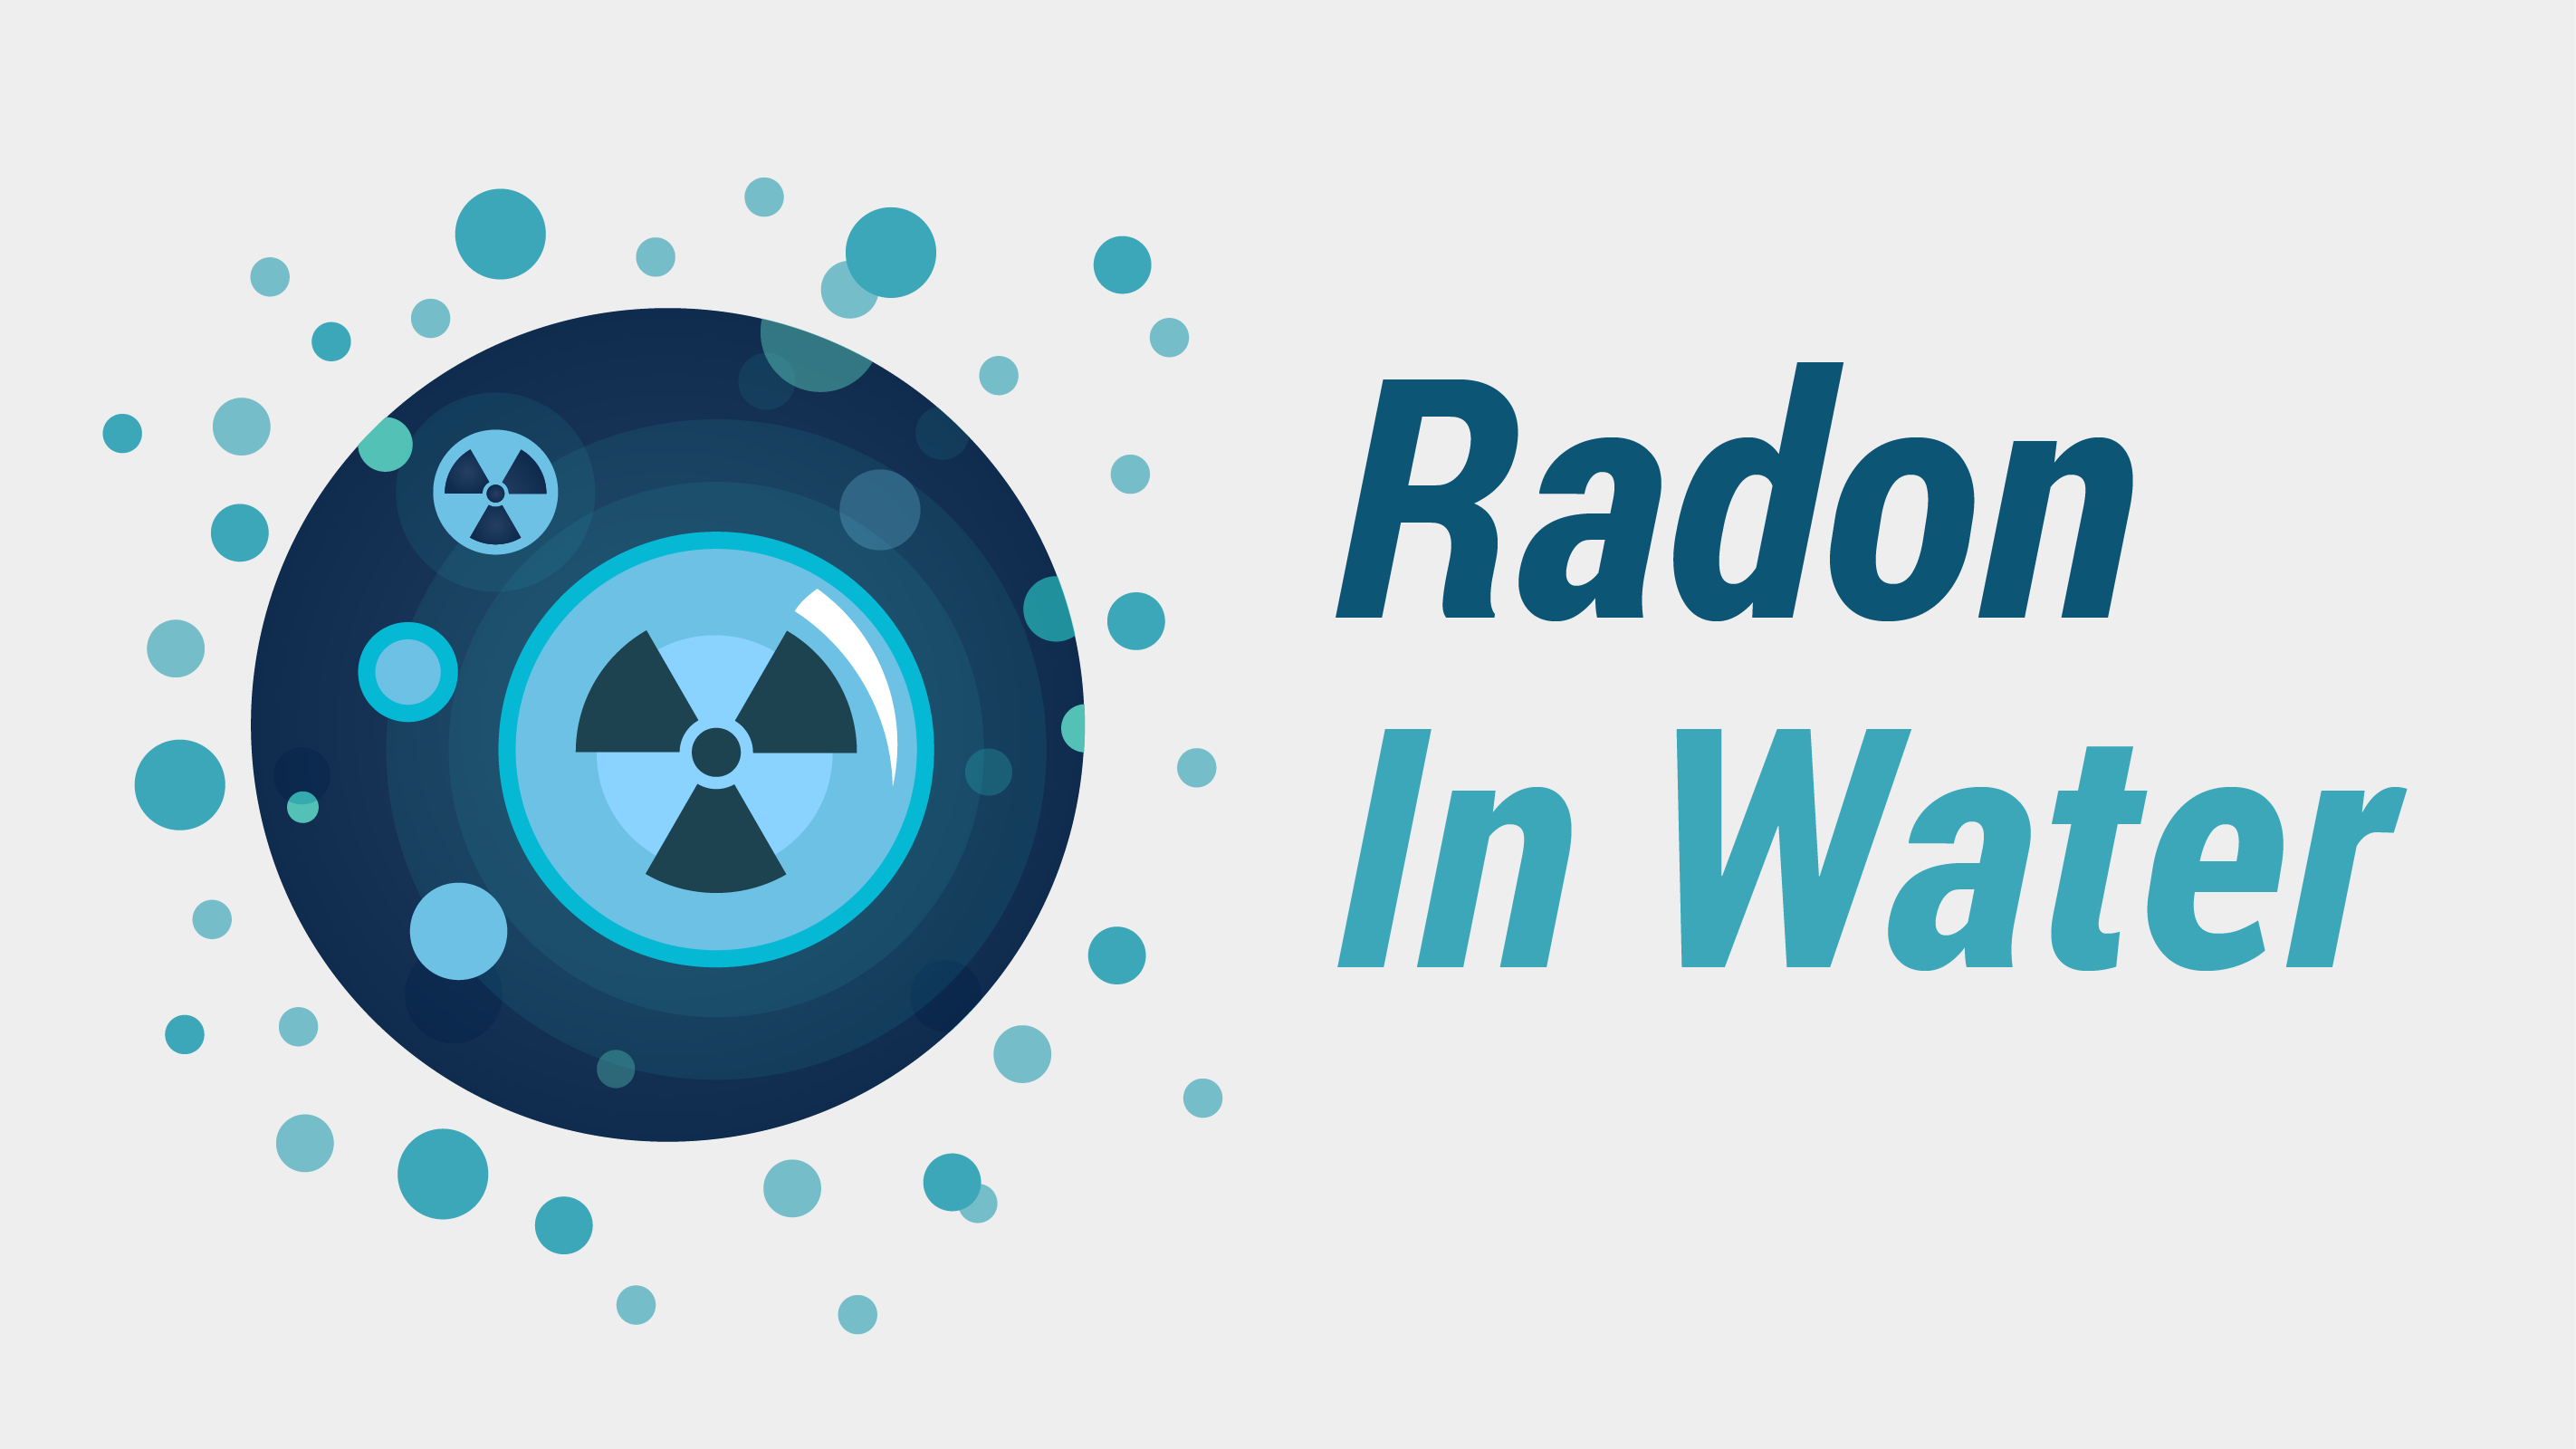 Radon in Water - What Is Radon and How to Remove Radon in Water